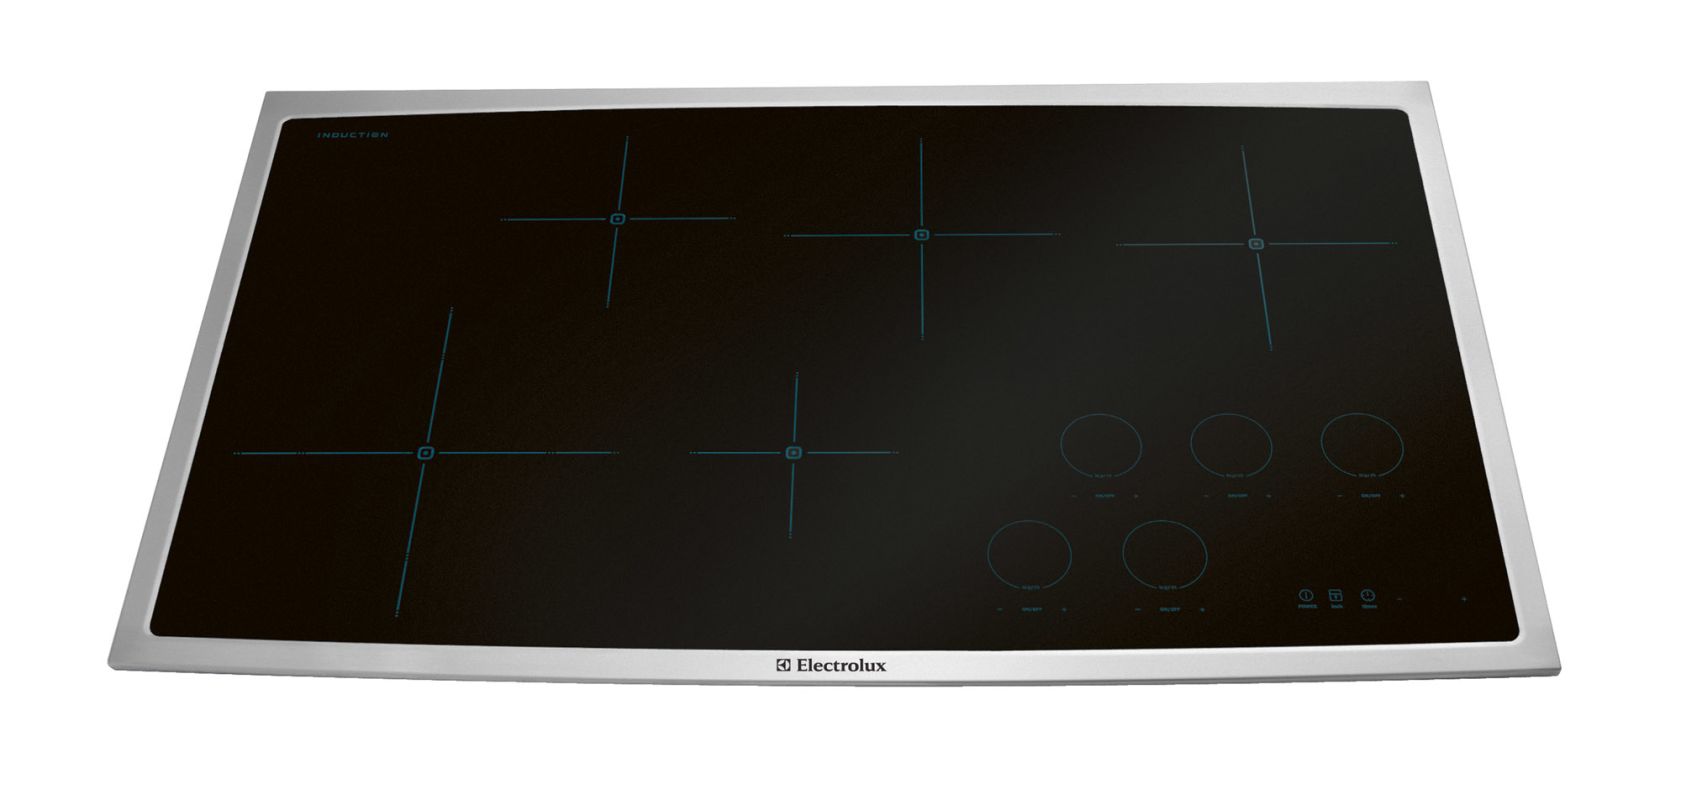 Electrolux EW36IC60L 36 Inch Wide Induction Cooktop with Perfect SetA Controls Stainless Steel Cooktops Induction